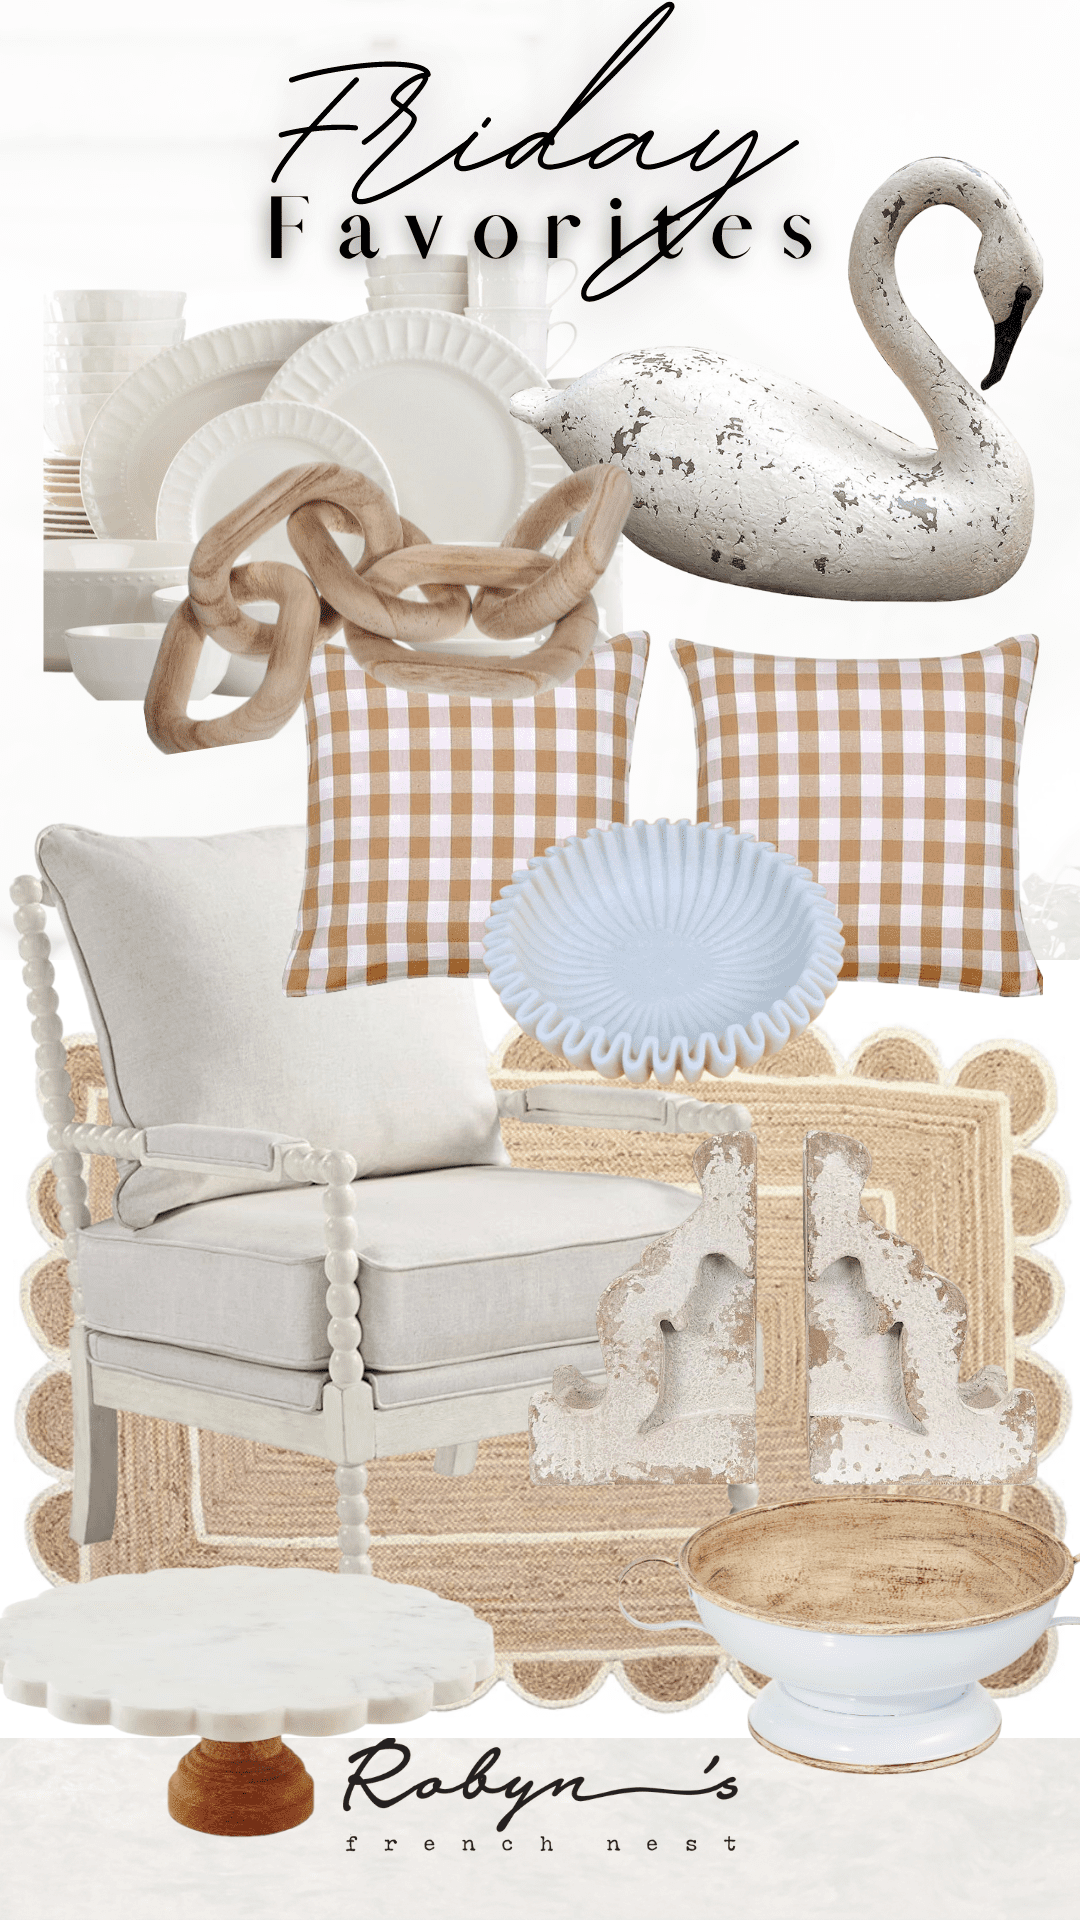 Friday Favorites-Woods and Whites